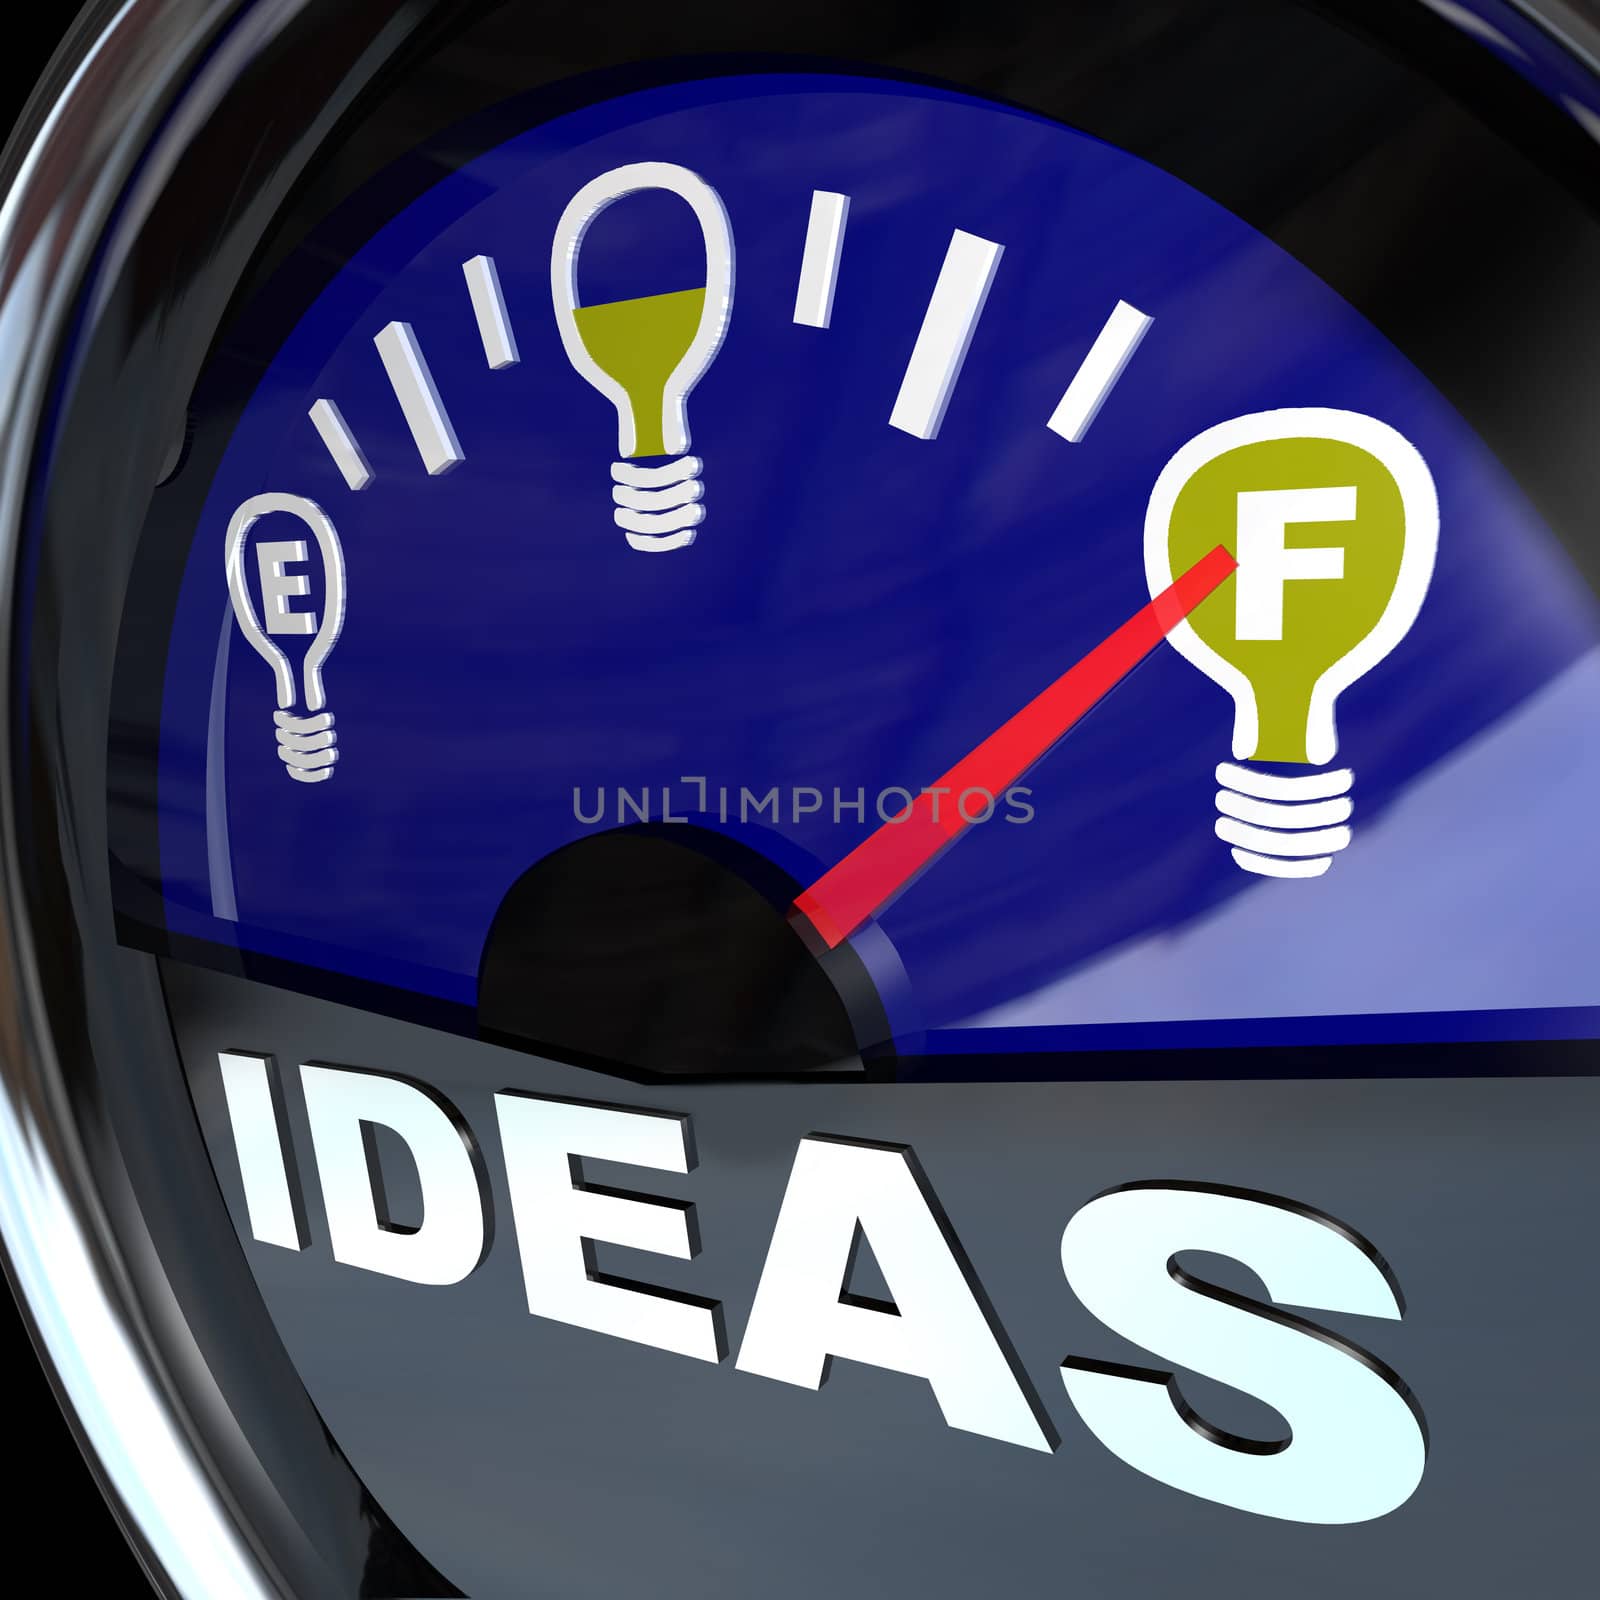 Full of Ideas - Innovation Fuel Gauge for Success by iQoncept